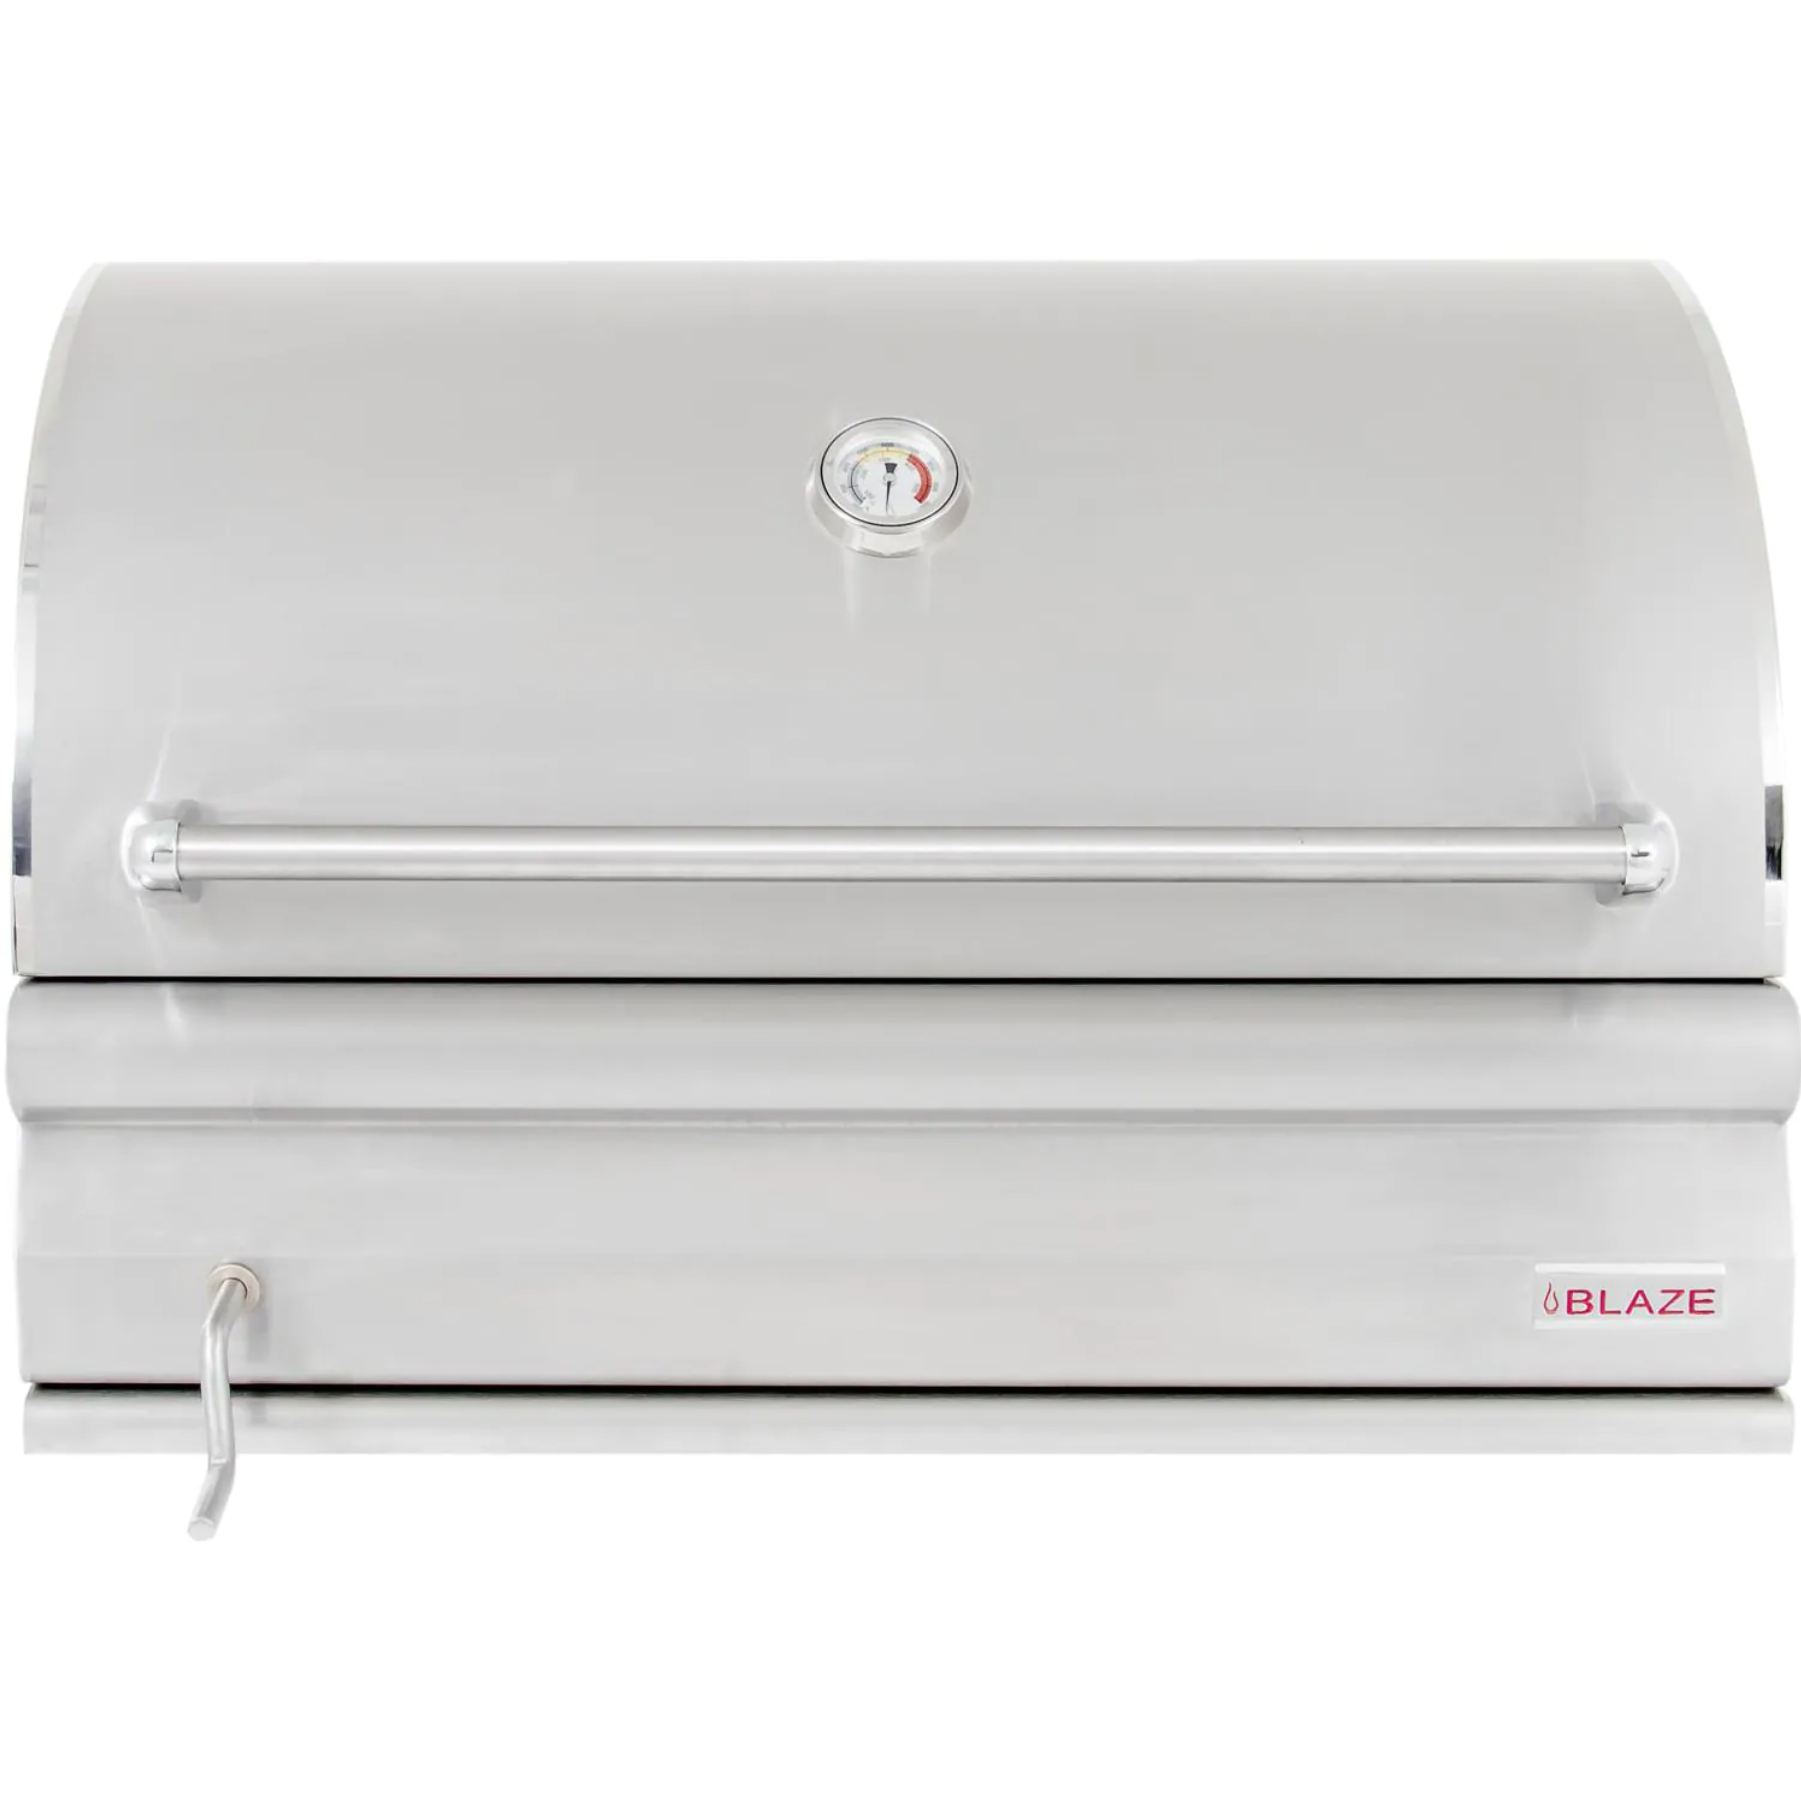 Blaze 32" Built-In Stainless Steel Charcoal Grill With Adjustable Charcoal Tray I The BBQHQ